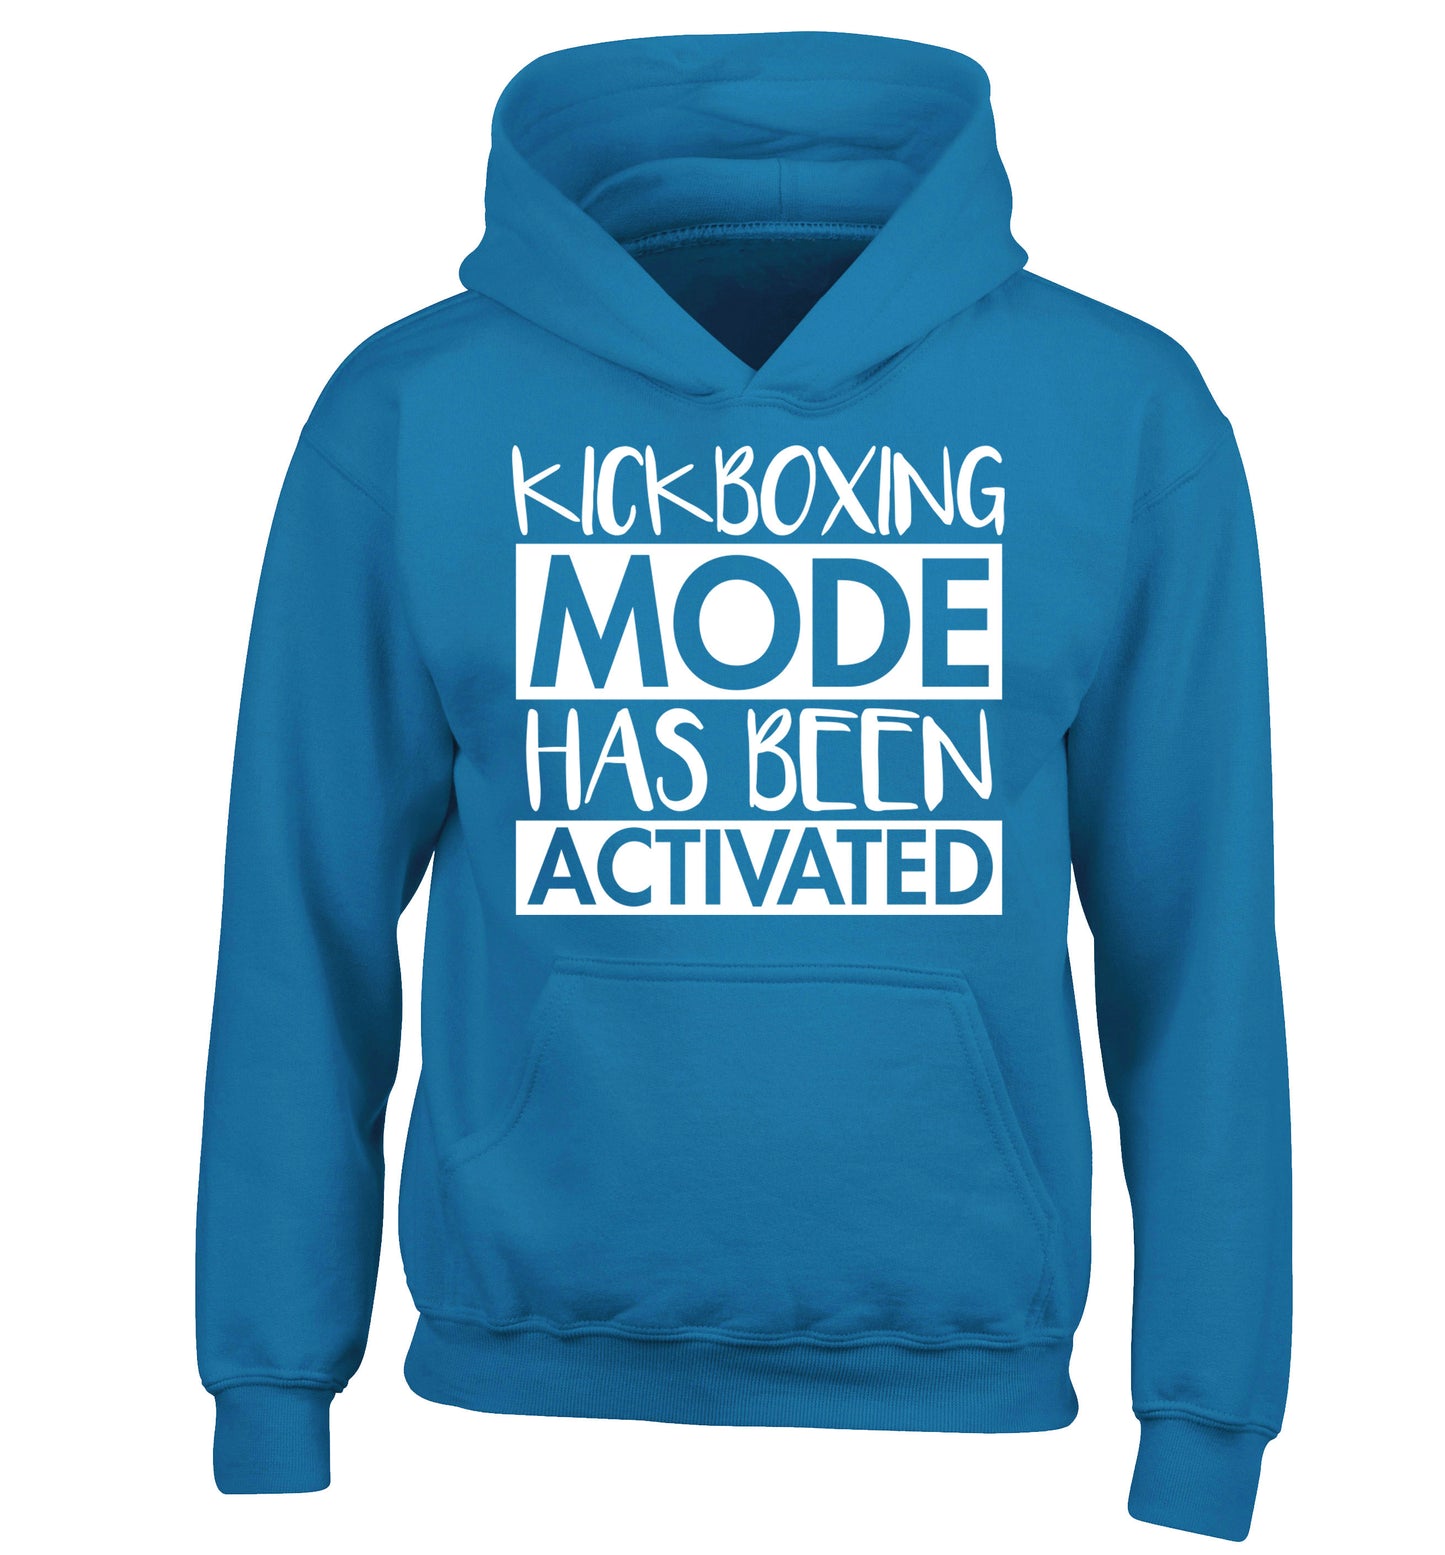 Kickboxing mode activated children's blue hoodie 12-14 Years